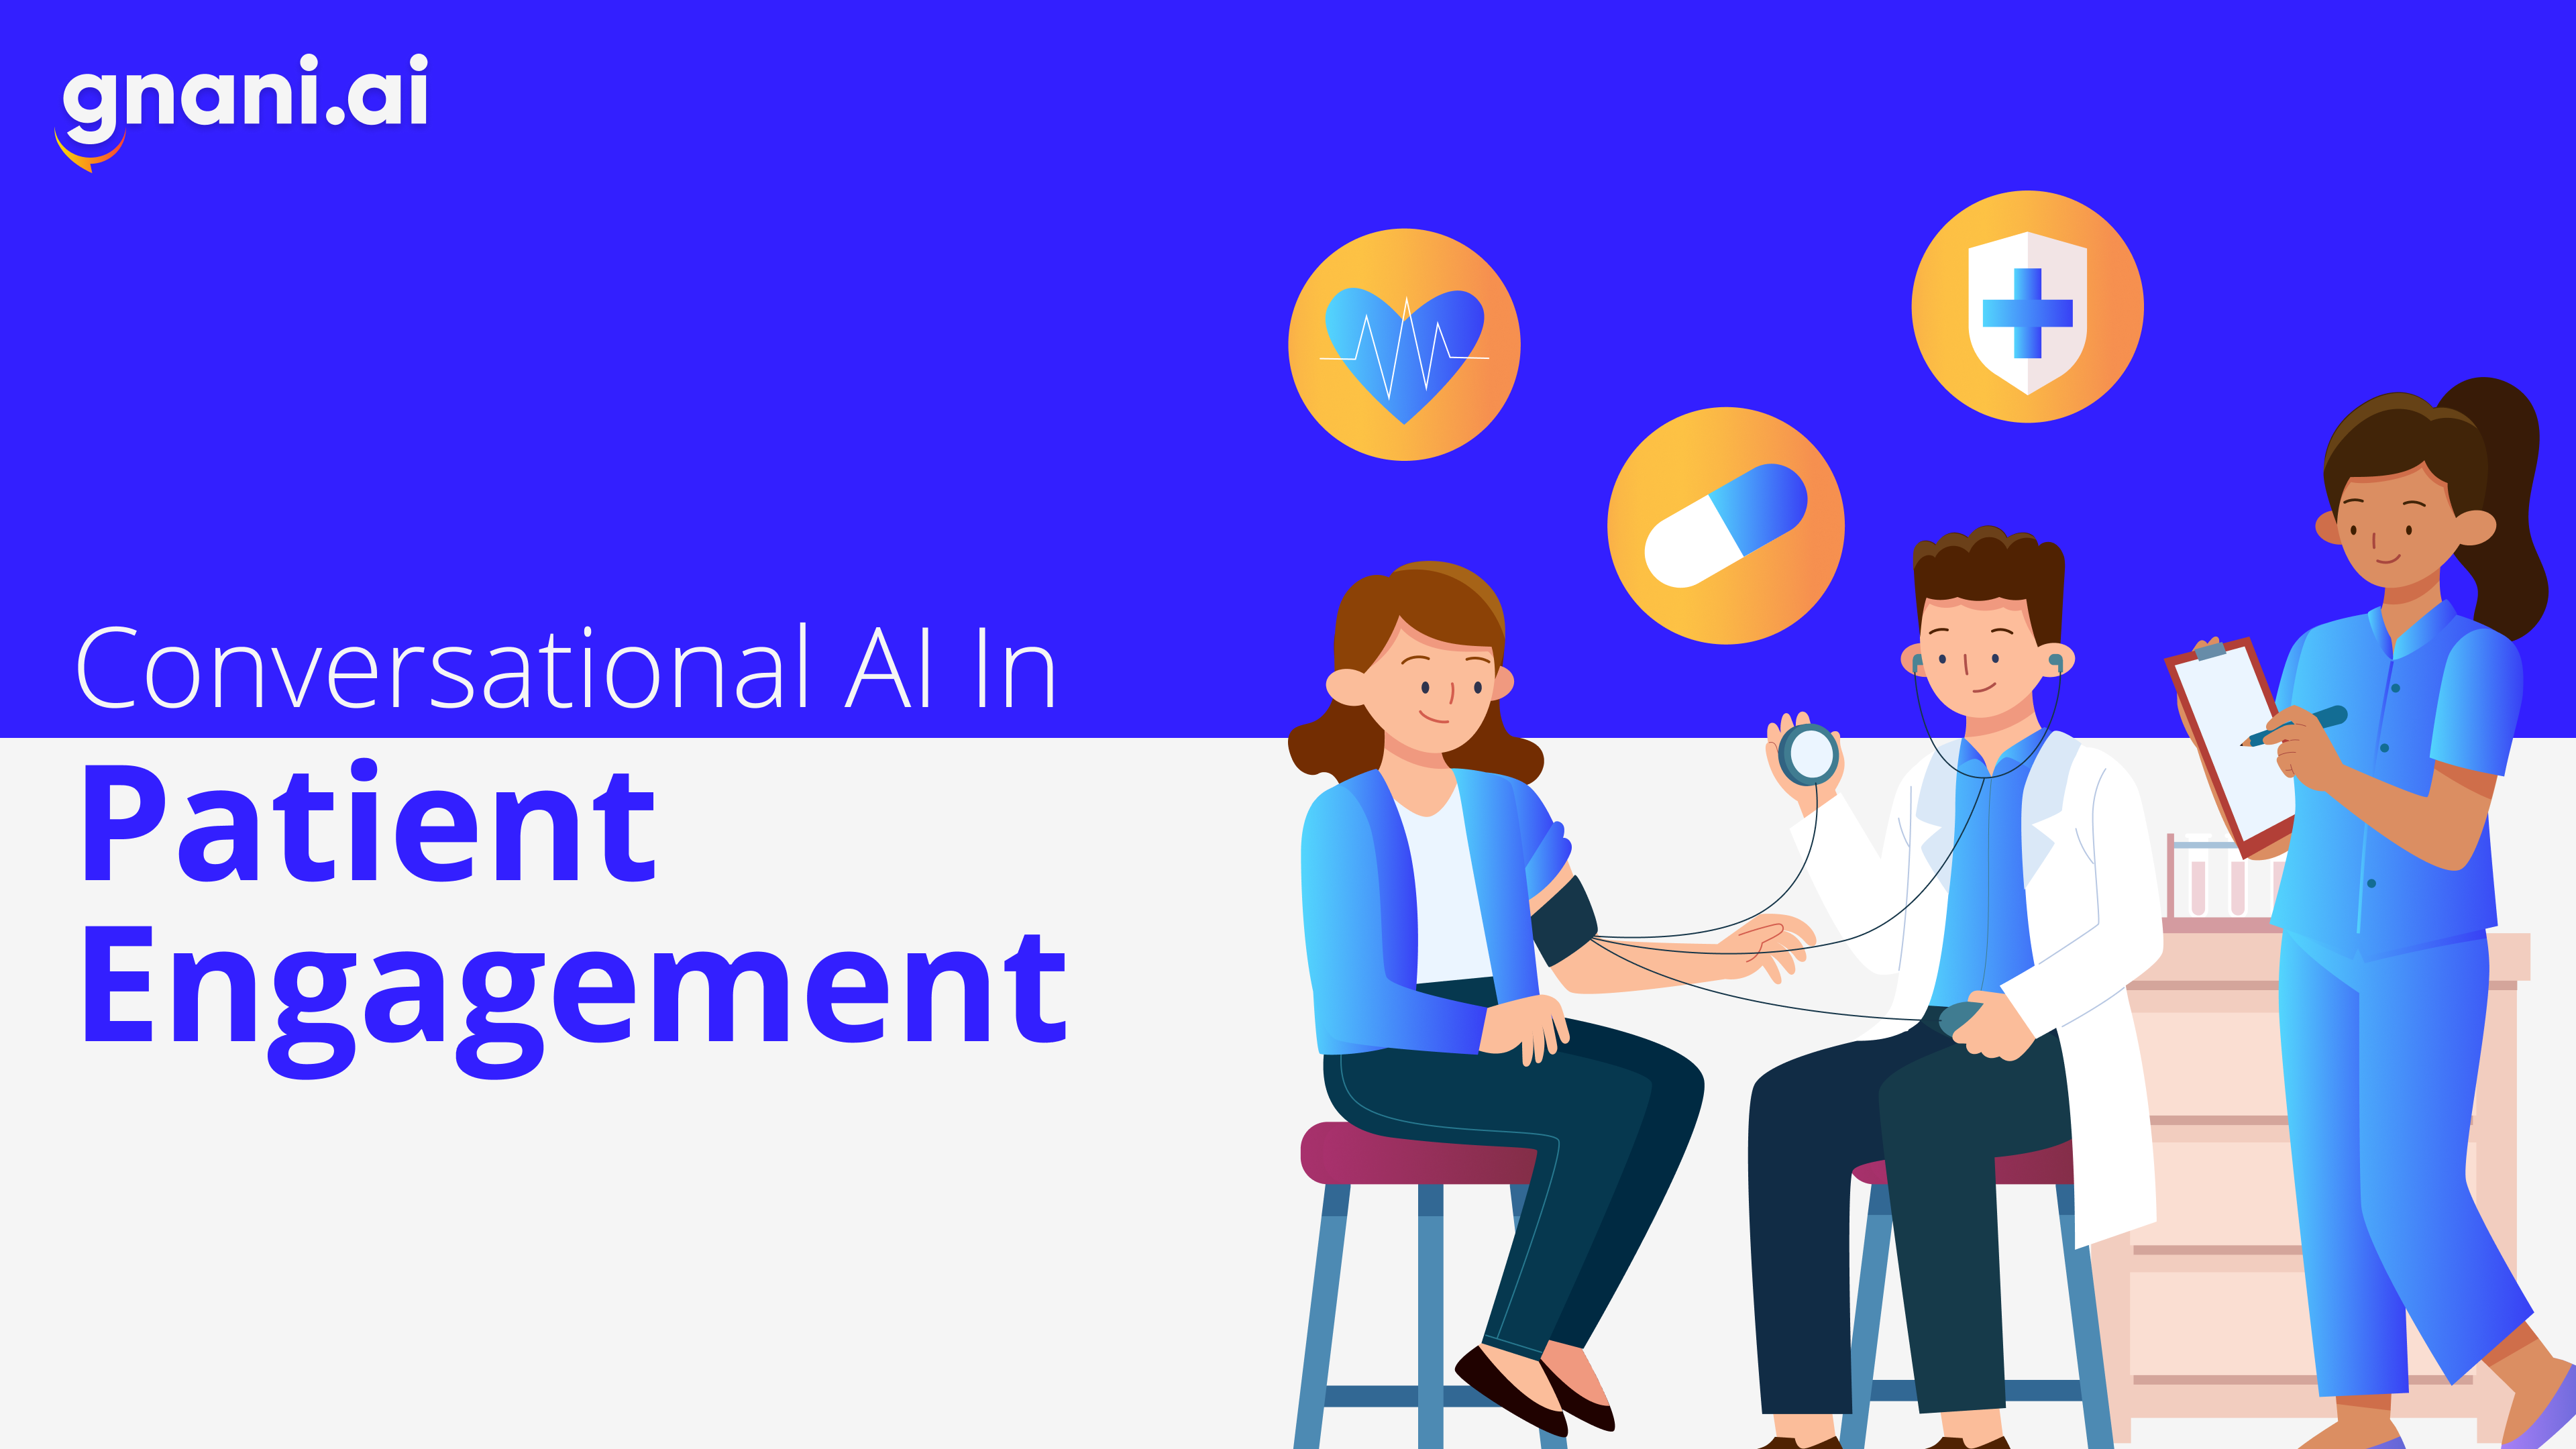 conversational AI in Patient Engagement featured image